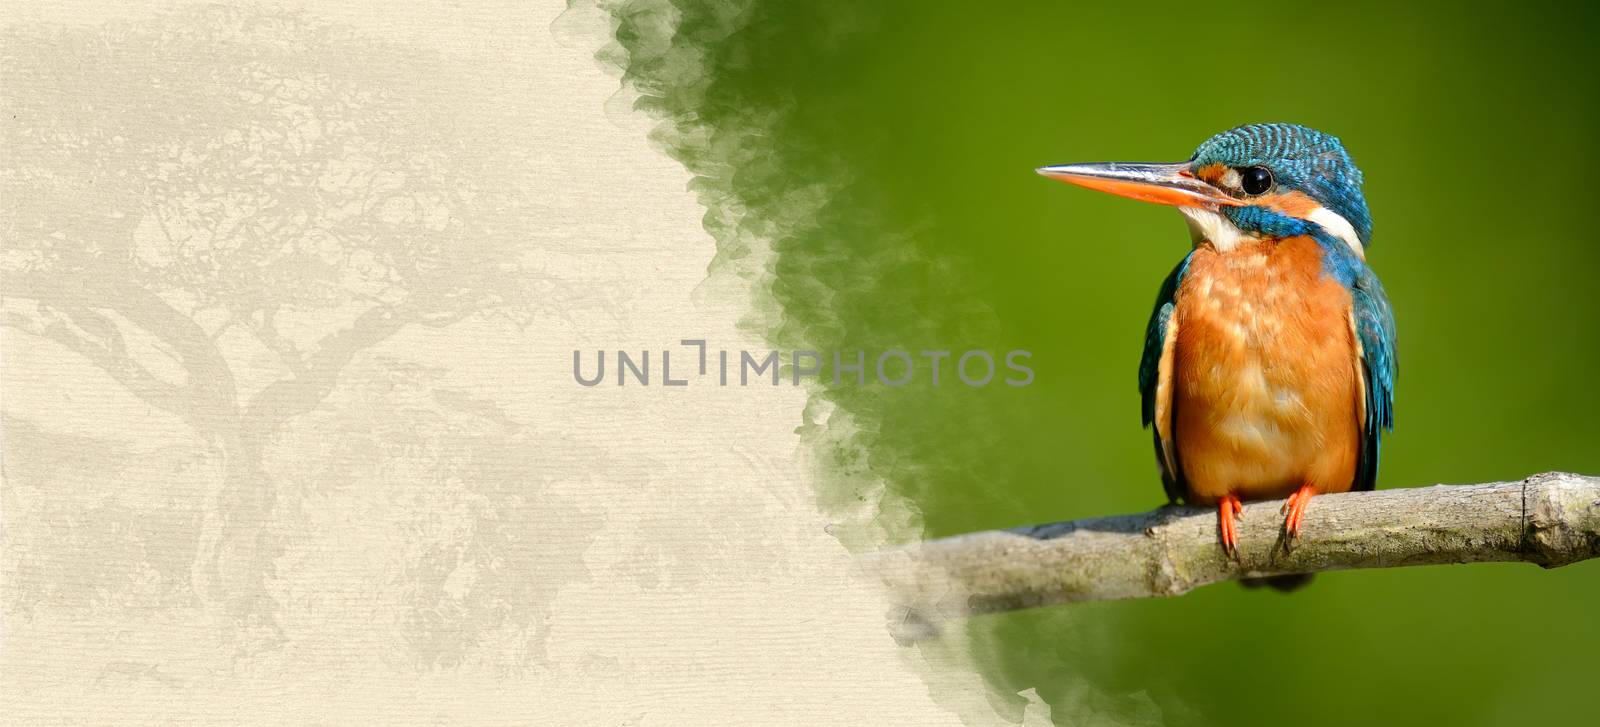 Kingfisher on textured paper by byrdyak